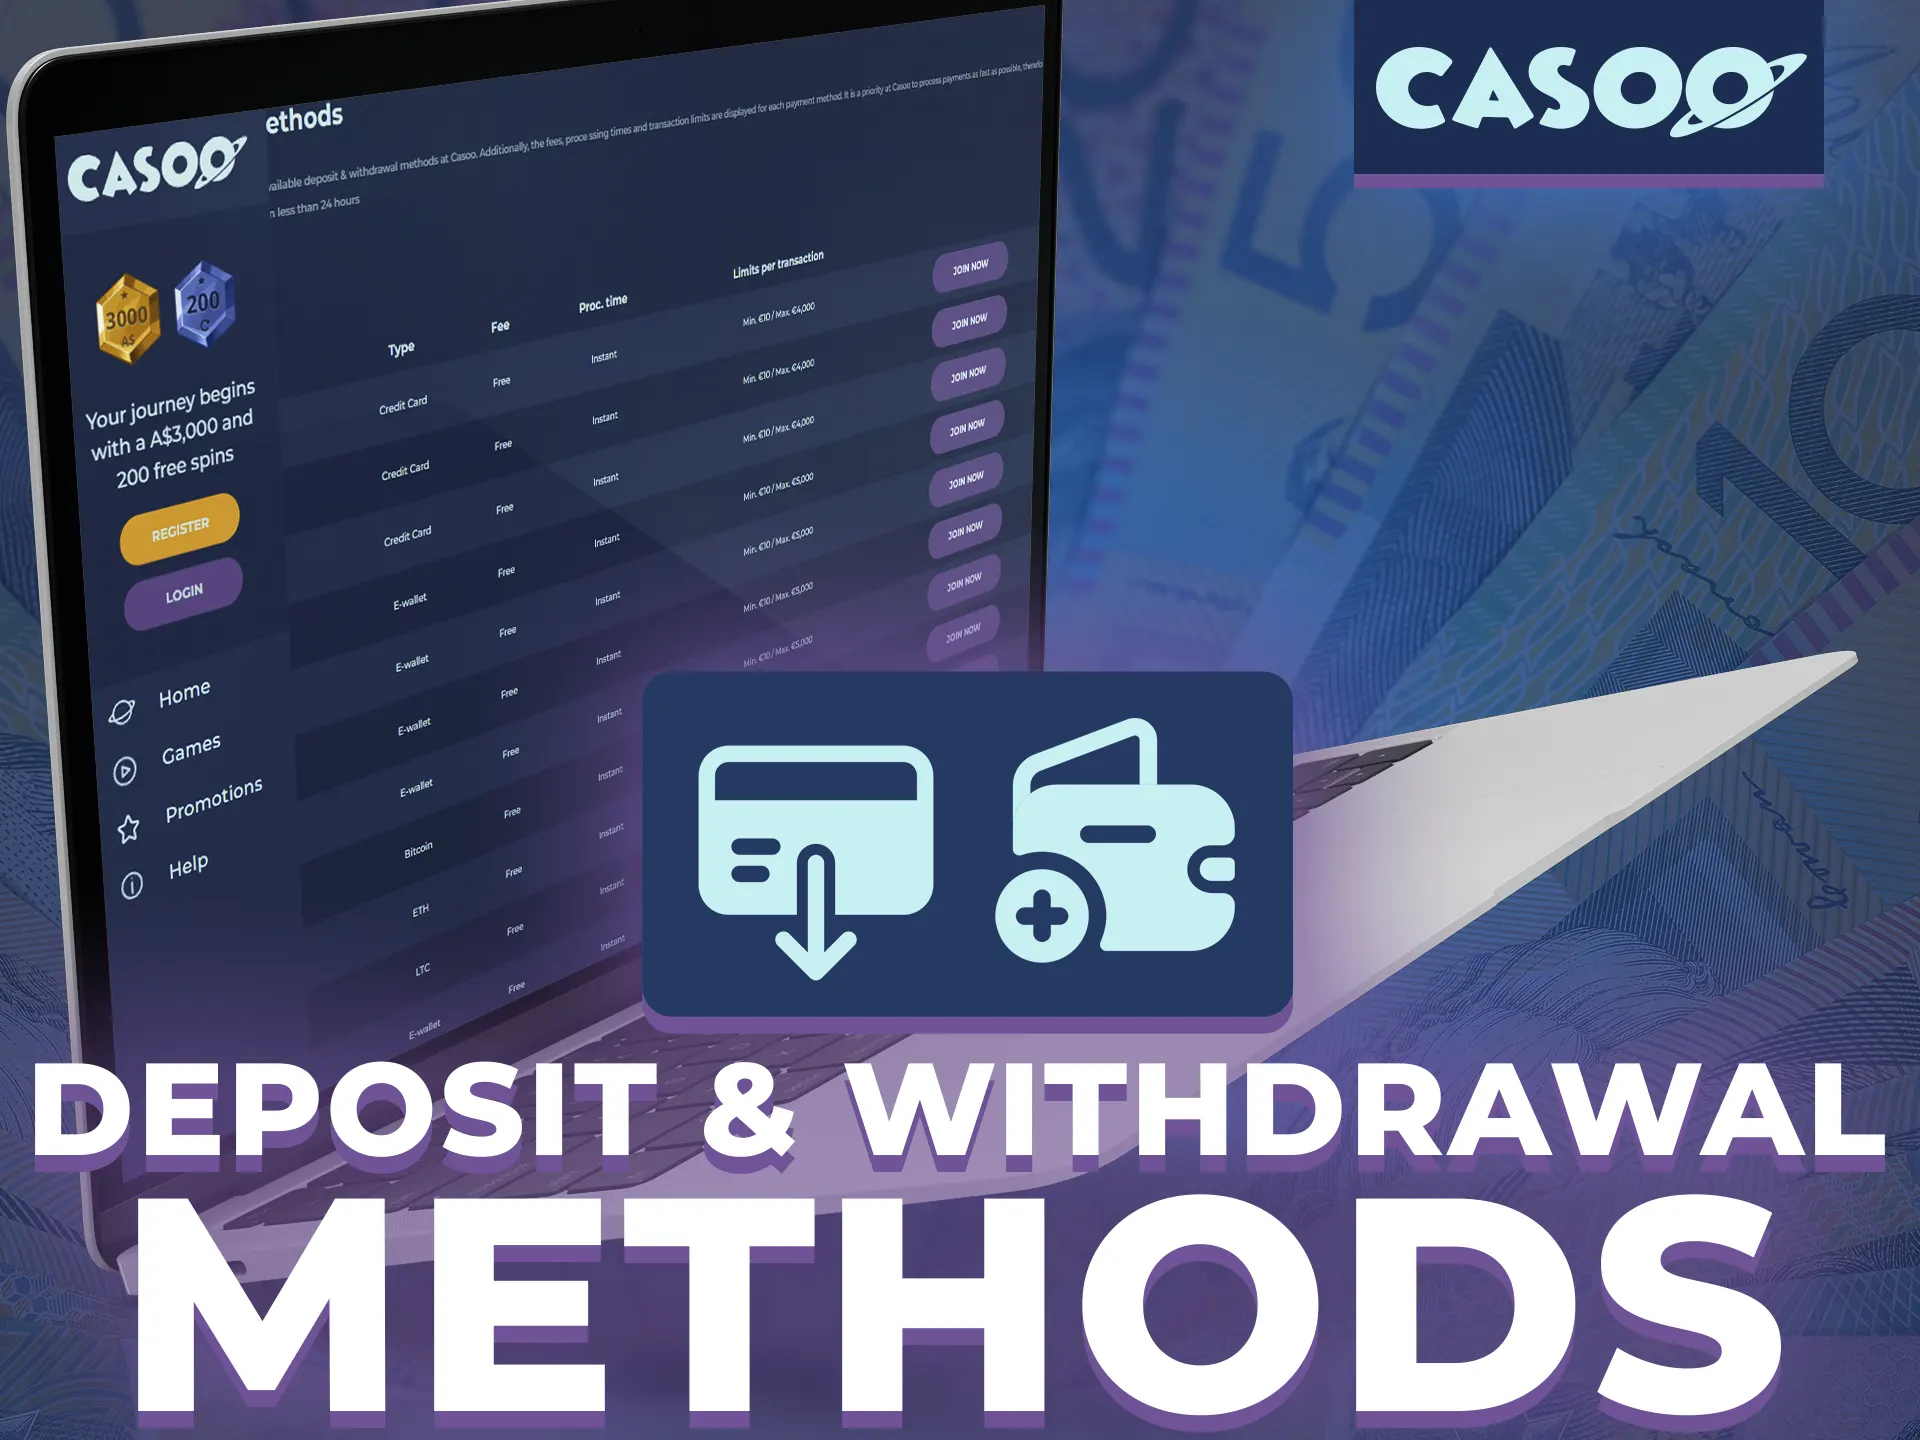 Casoo offers a variety of deposit and withdrawal methods.